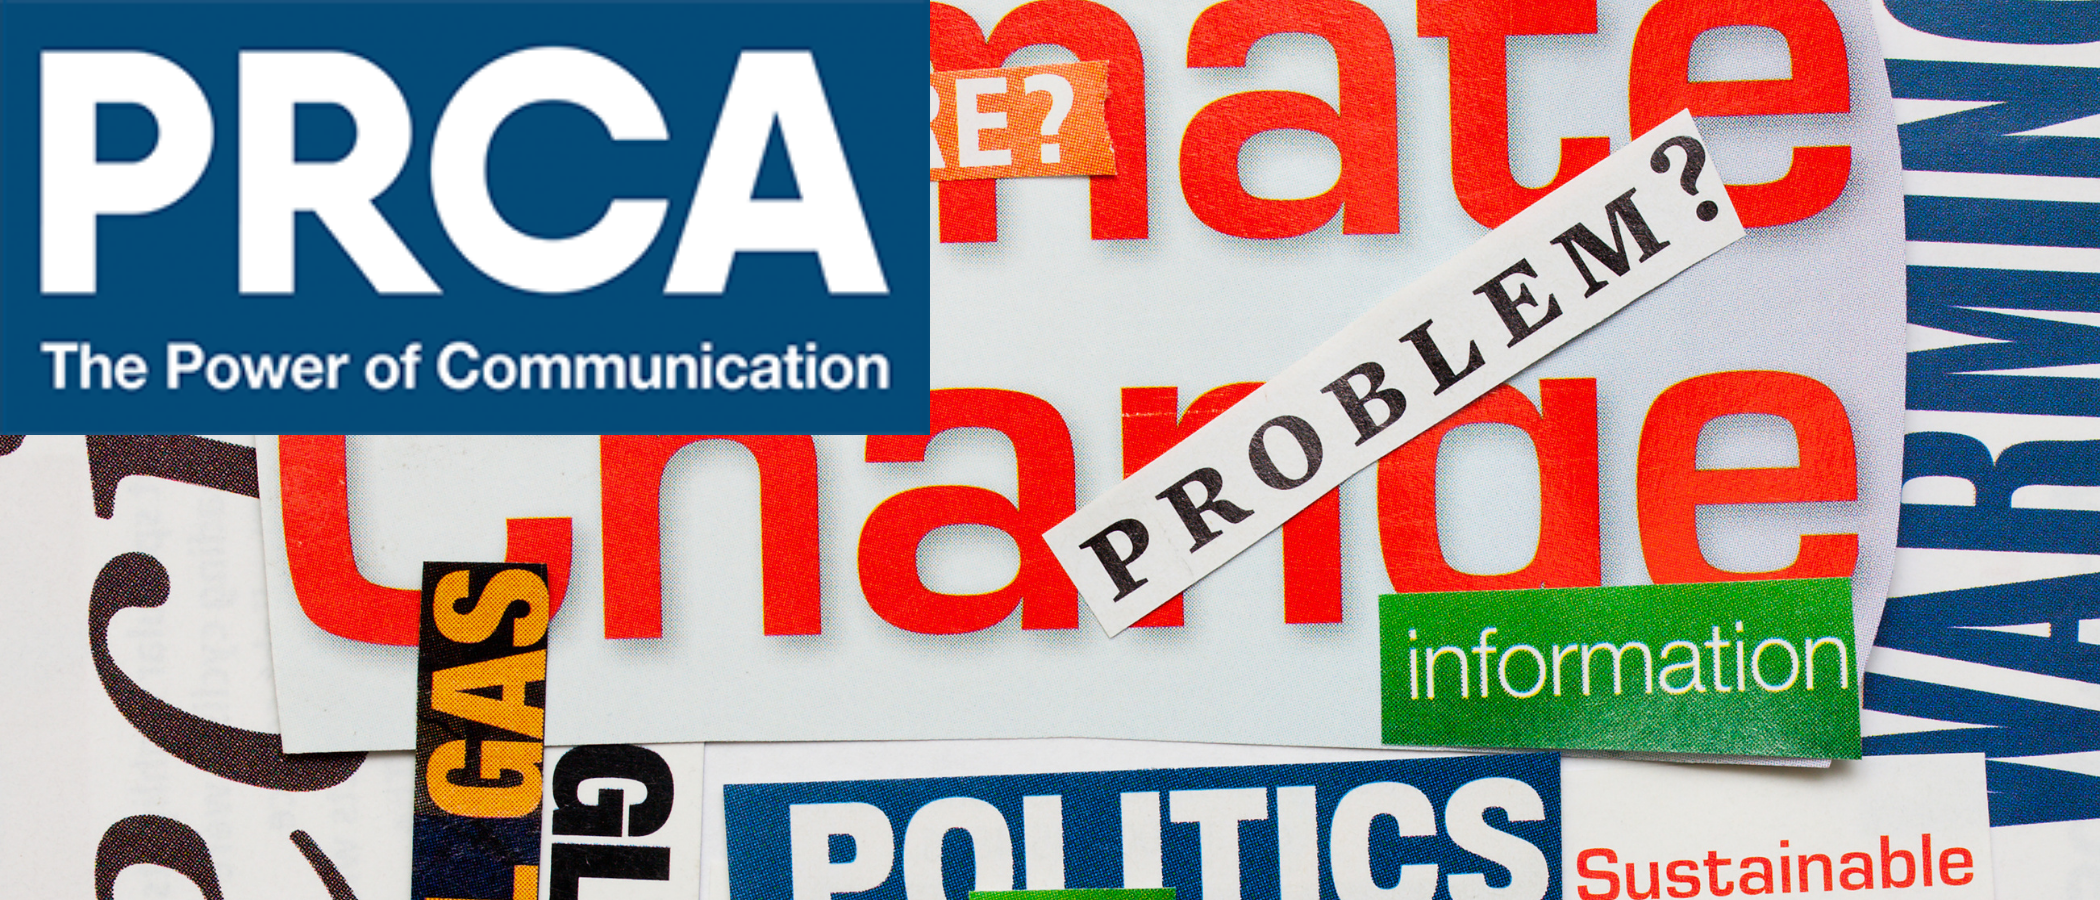 A climate word graphic with PRCA logo